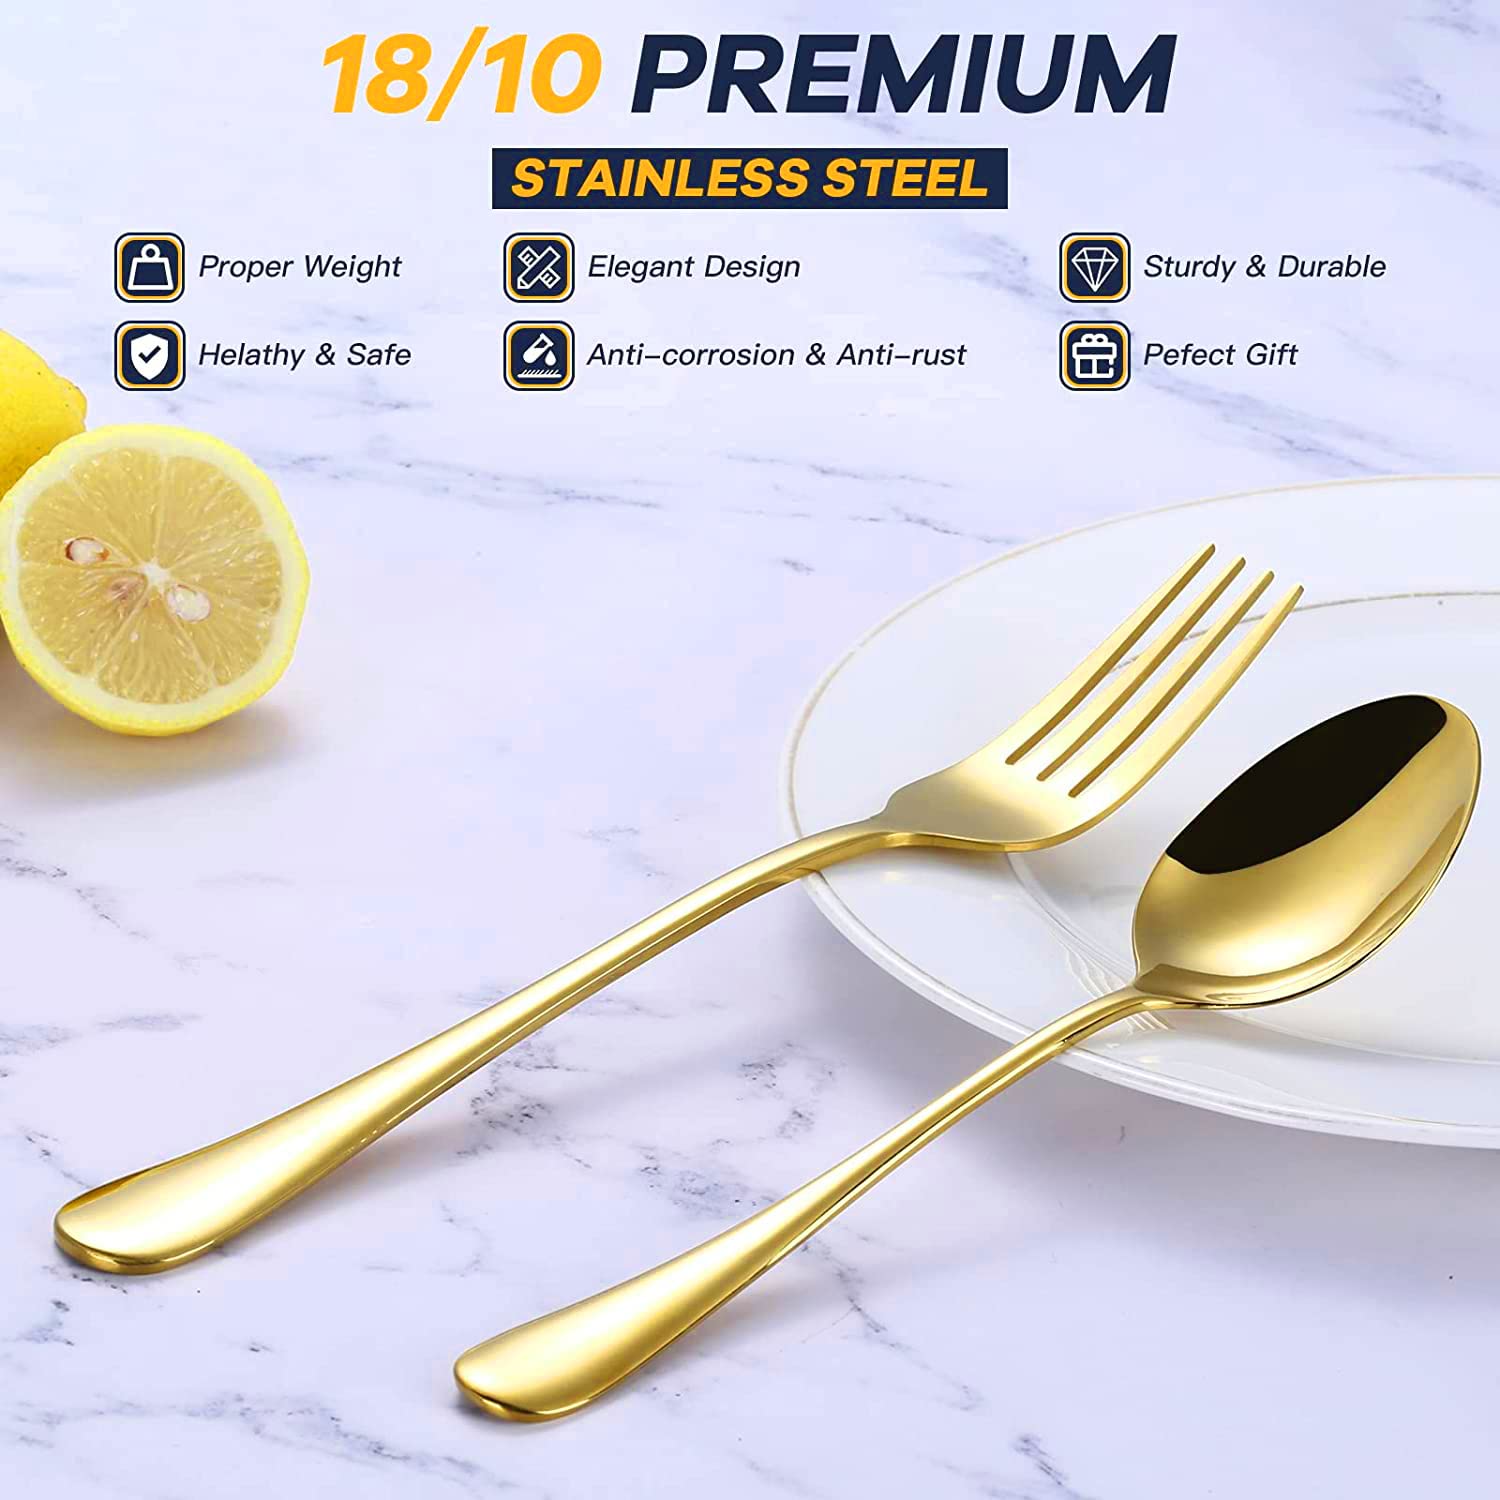 12-Pieces Silverware Set, Flatware Set for 6, Stainless Steel Tableware Cutlery Set with Spoons Forks, Utensil Sets for Home Kitchen Restaurant Hotel, Dishwasher Safe (Gold)